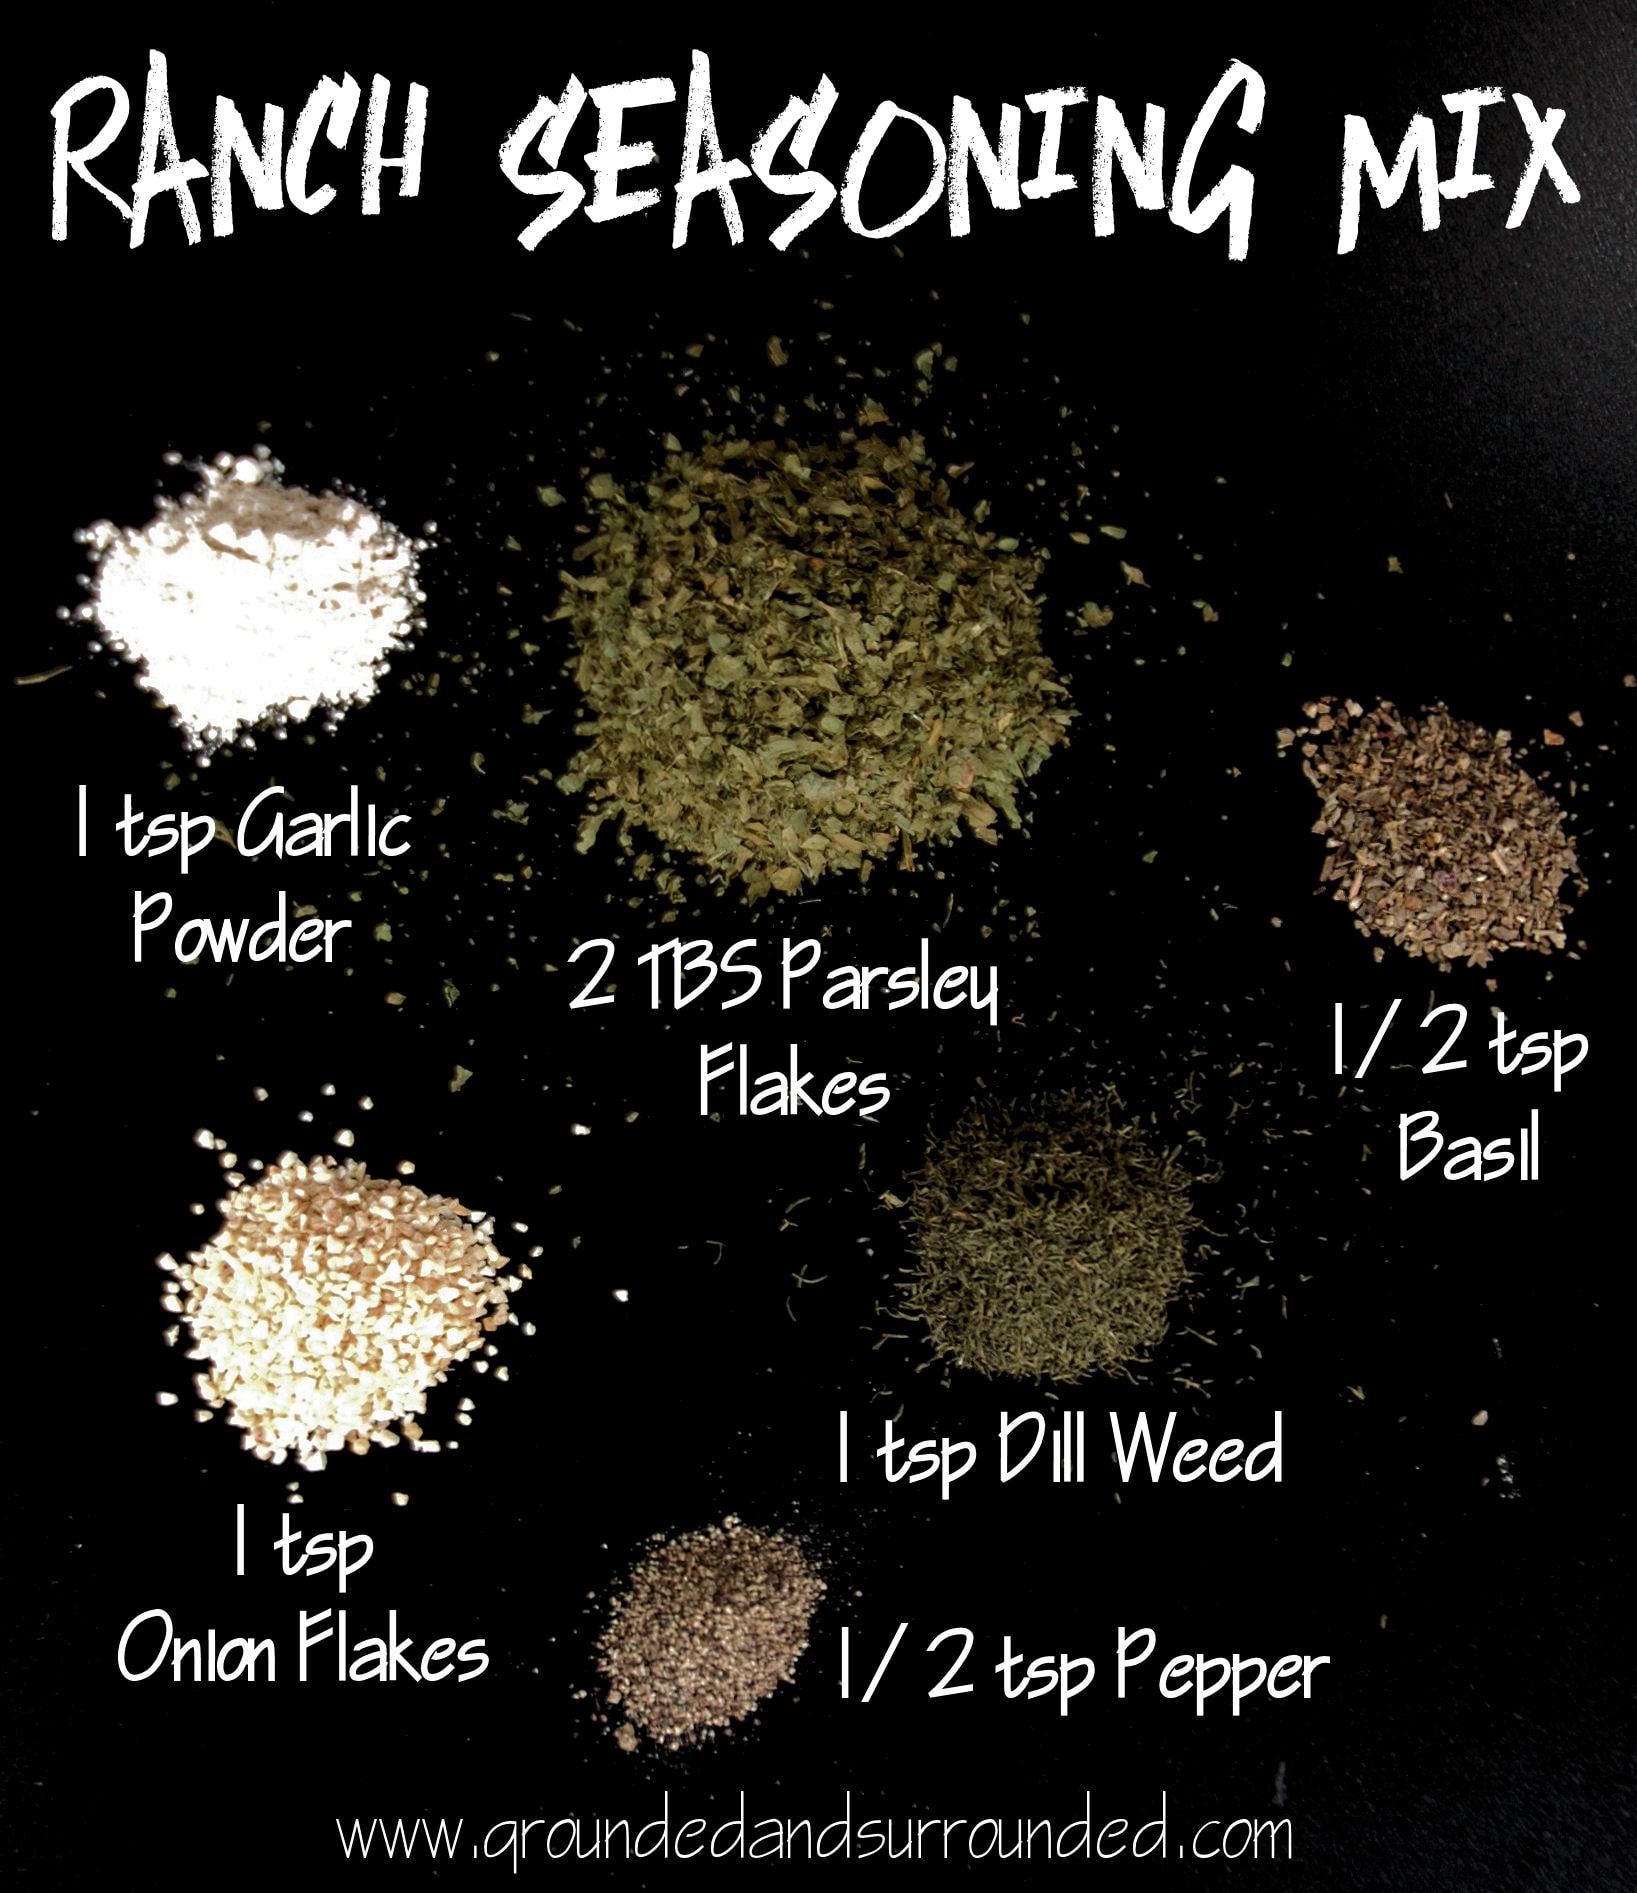 All the ingredients for a homemade ranch seasoning mix.